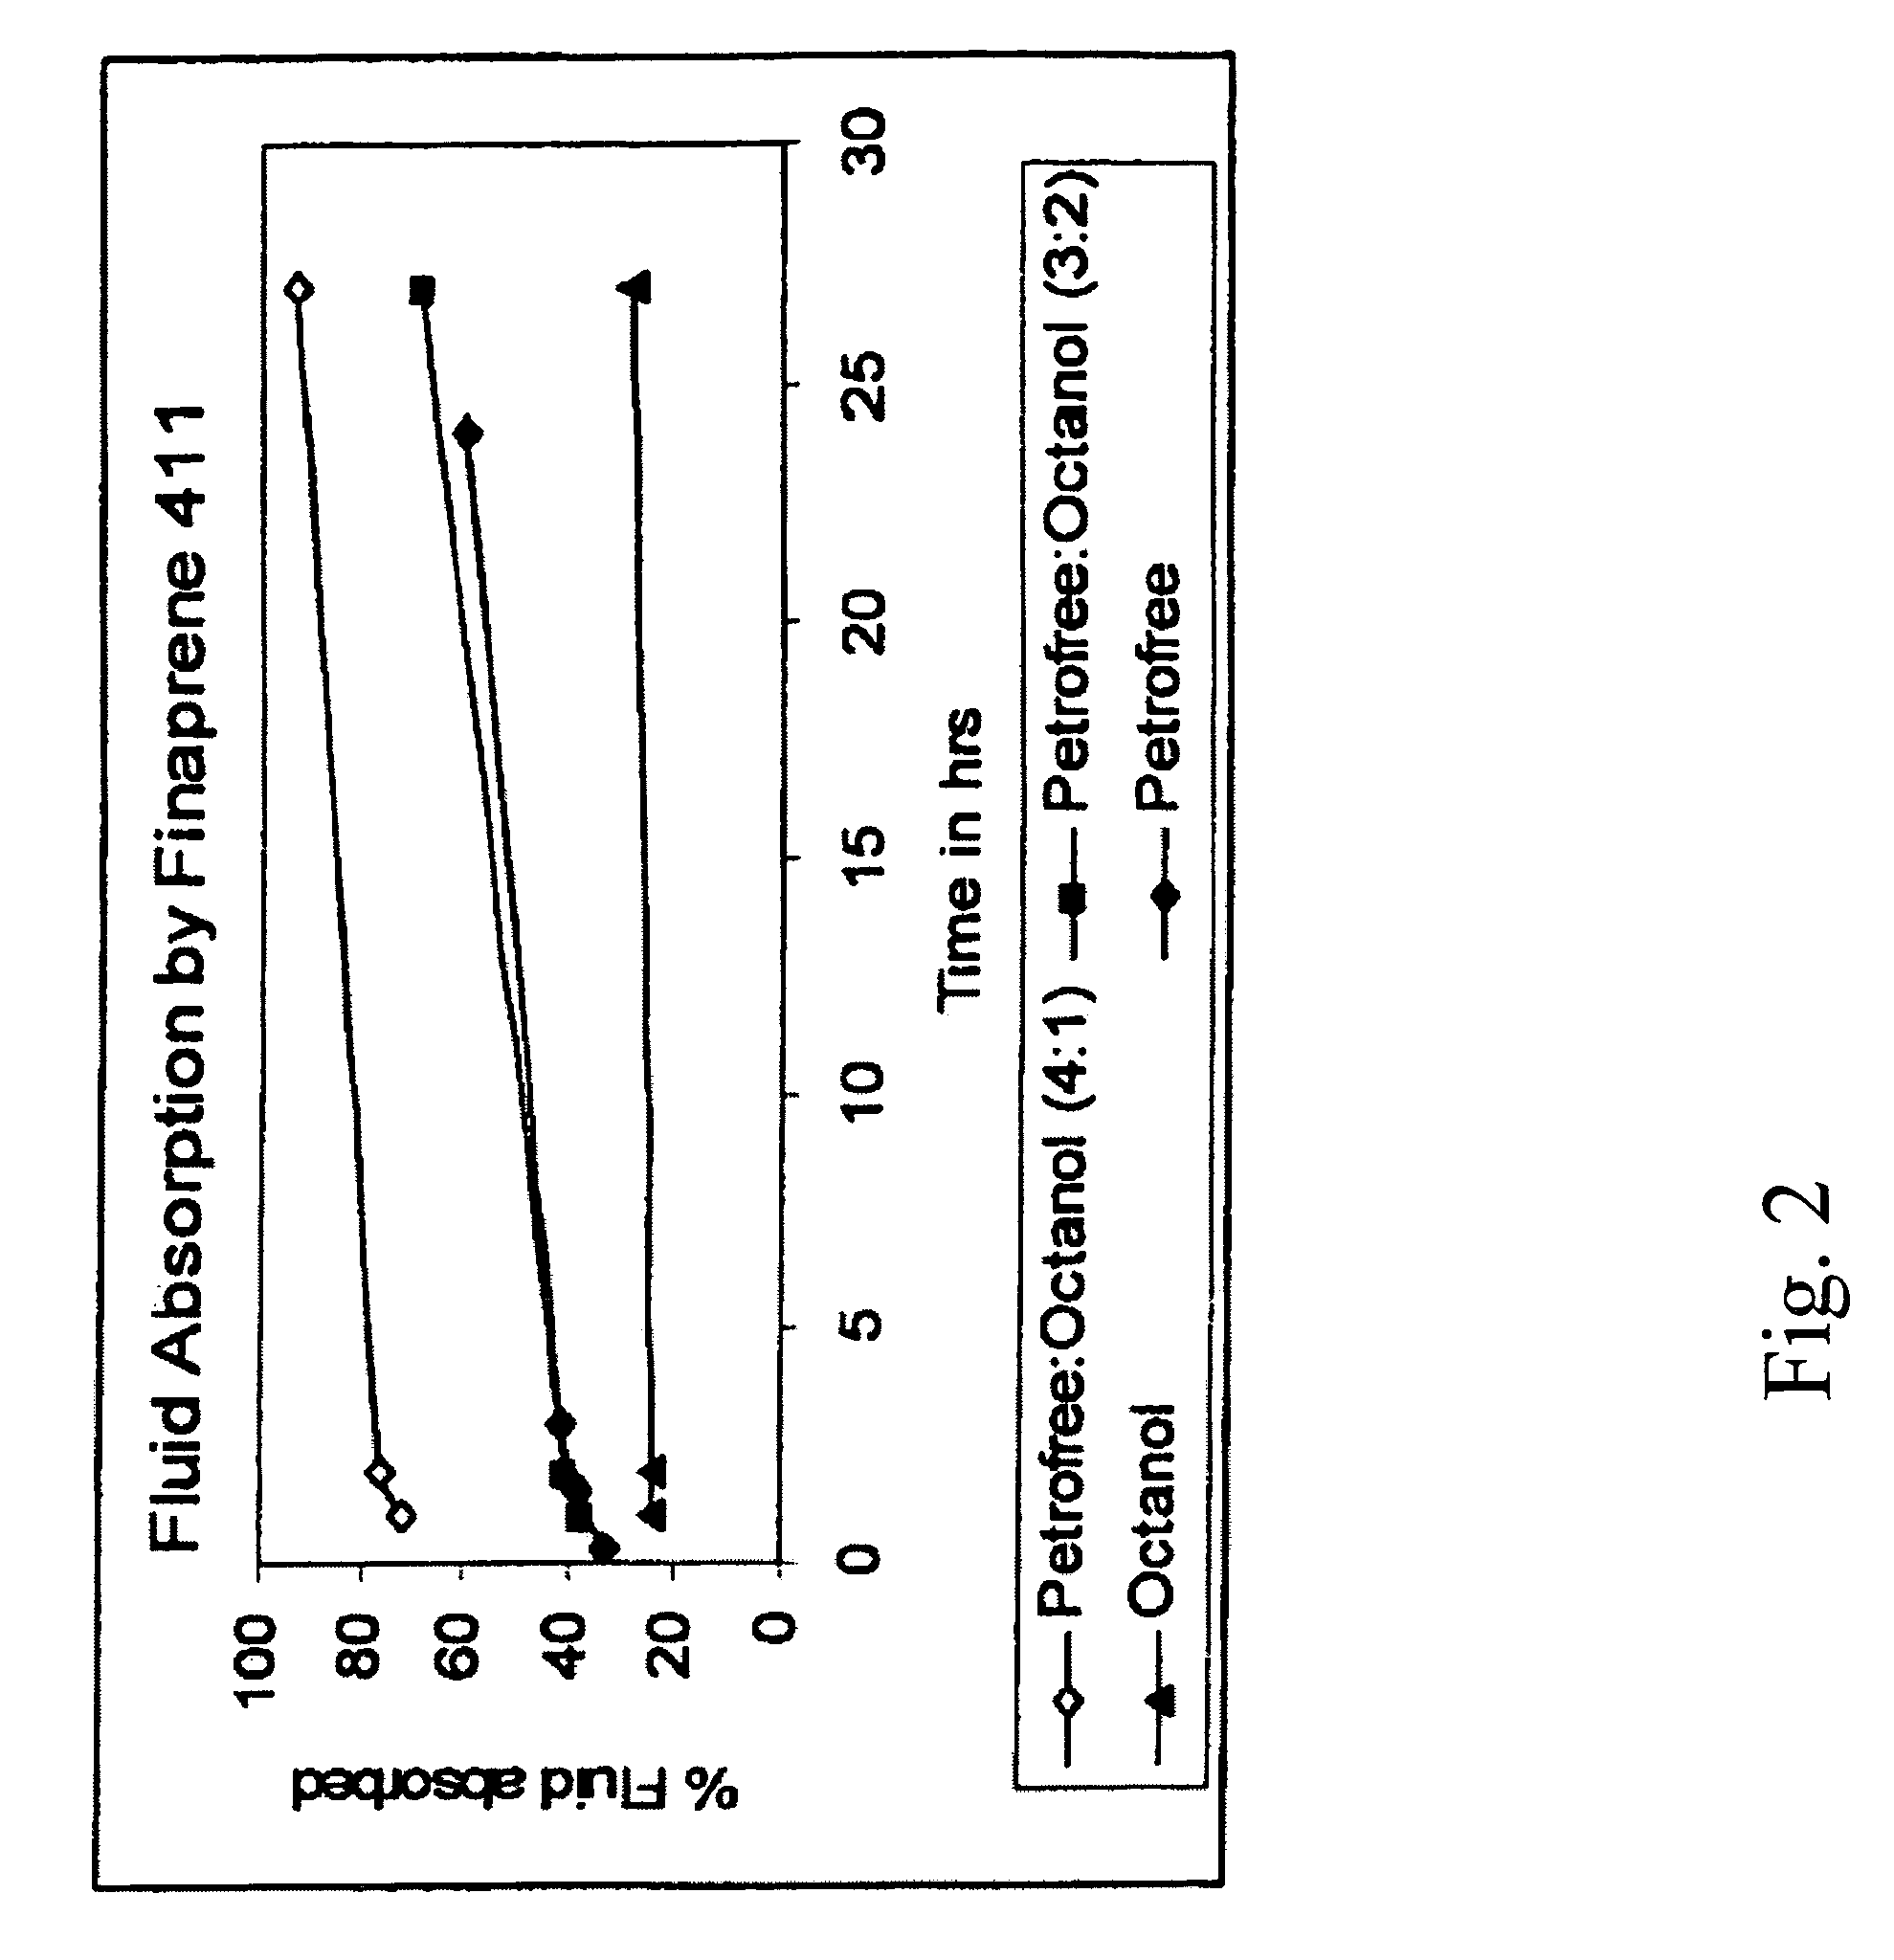 Methods for wellbore strengthening and controlling fluid circulation loss